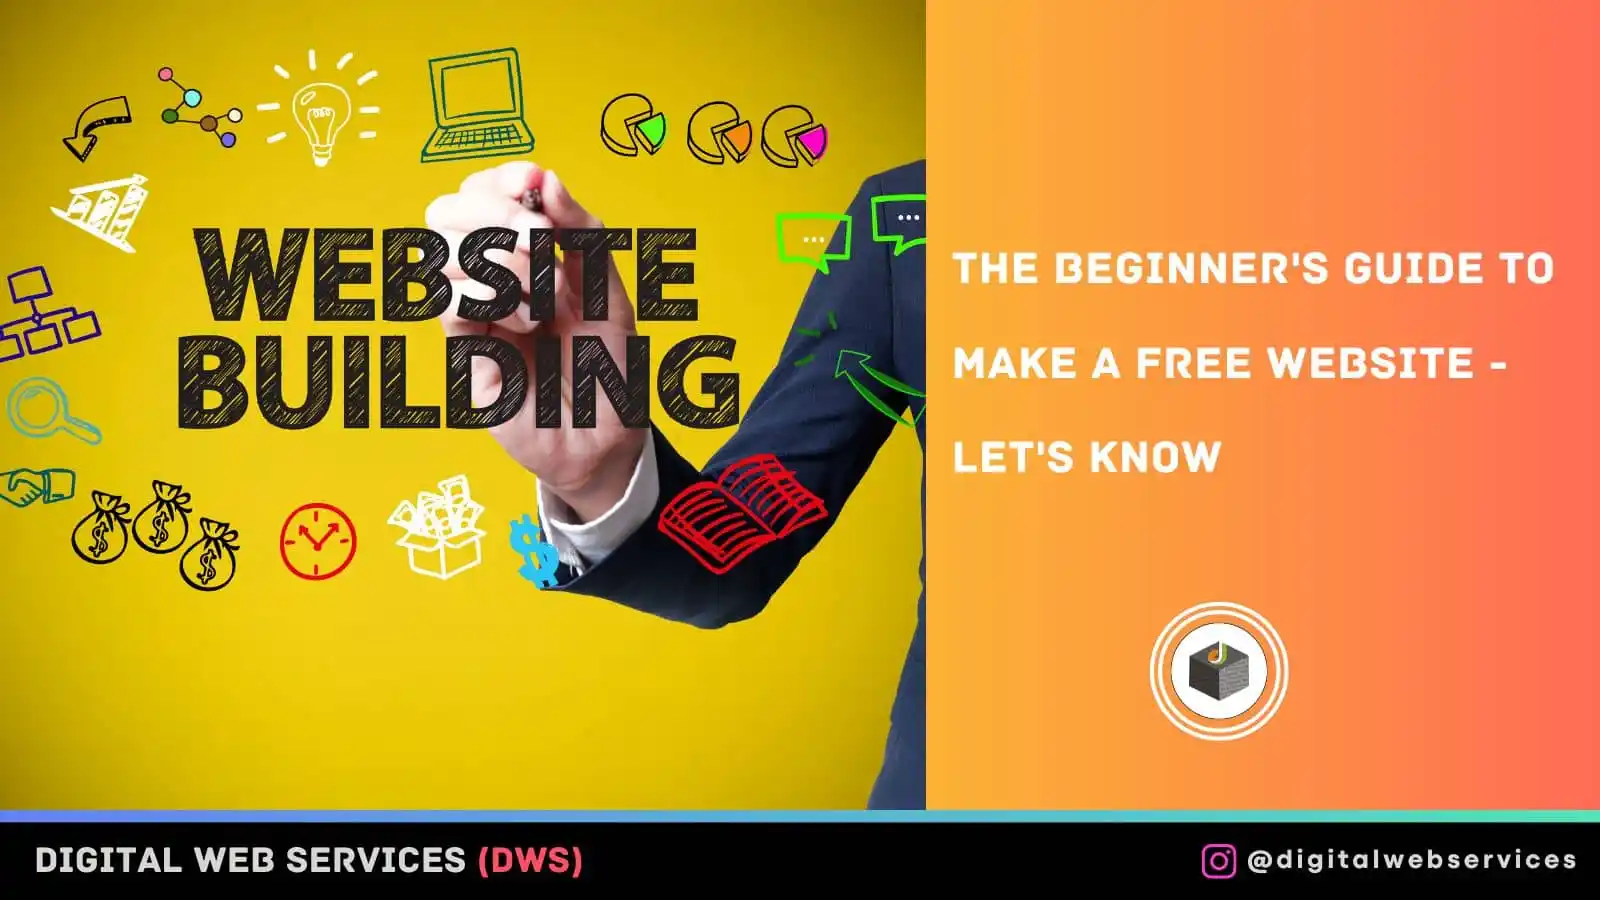 The Beginner's Guide to Make a Free Website - Let's Know